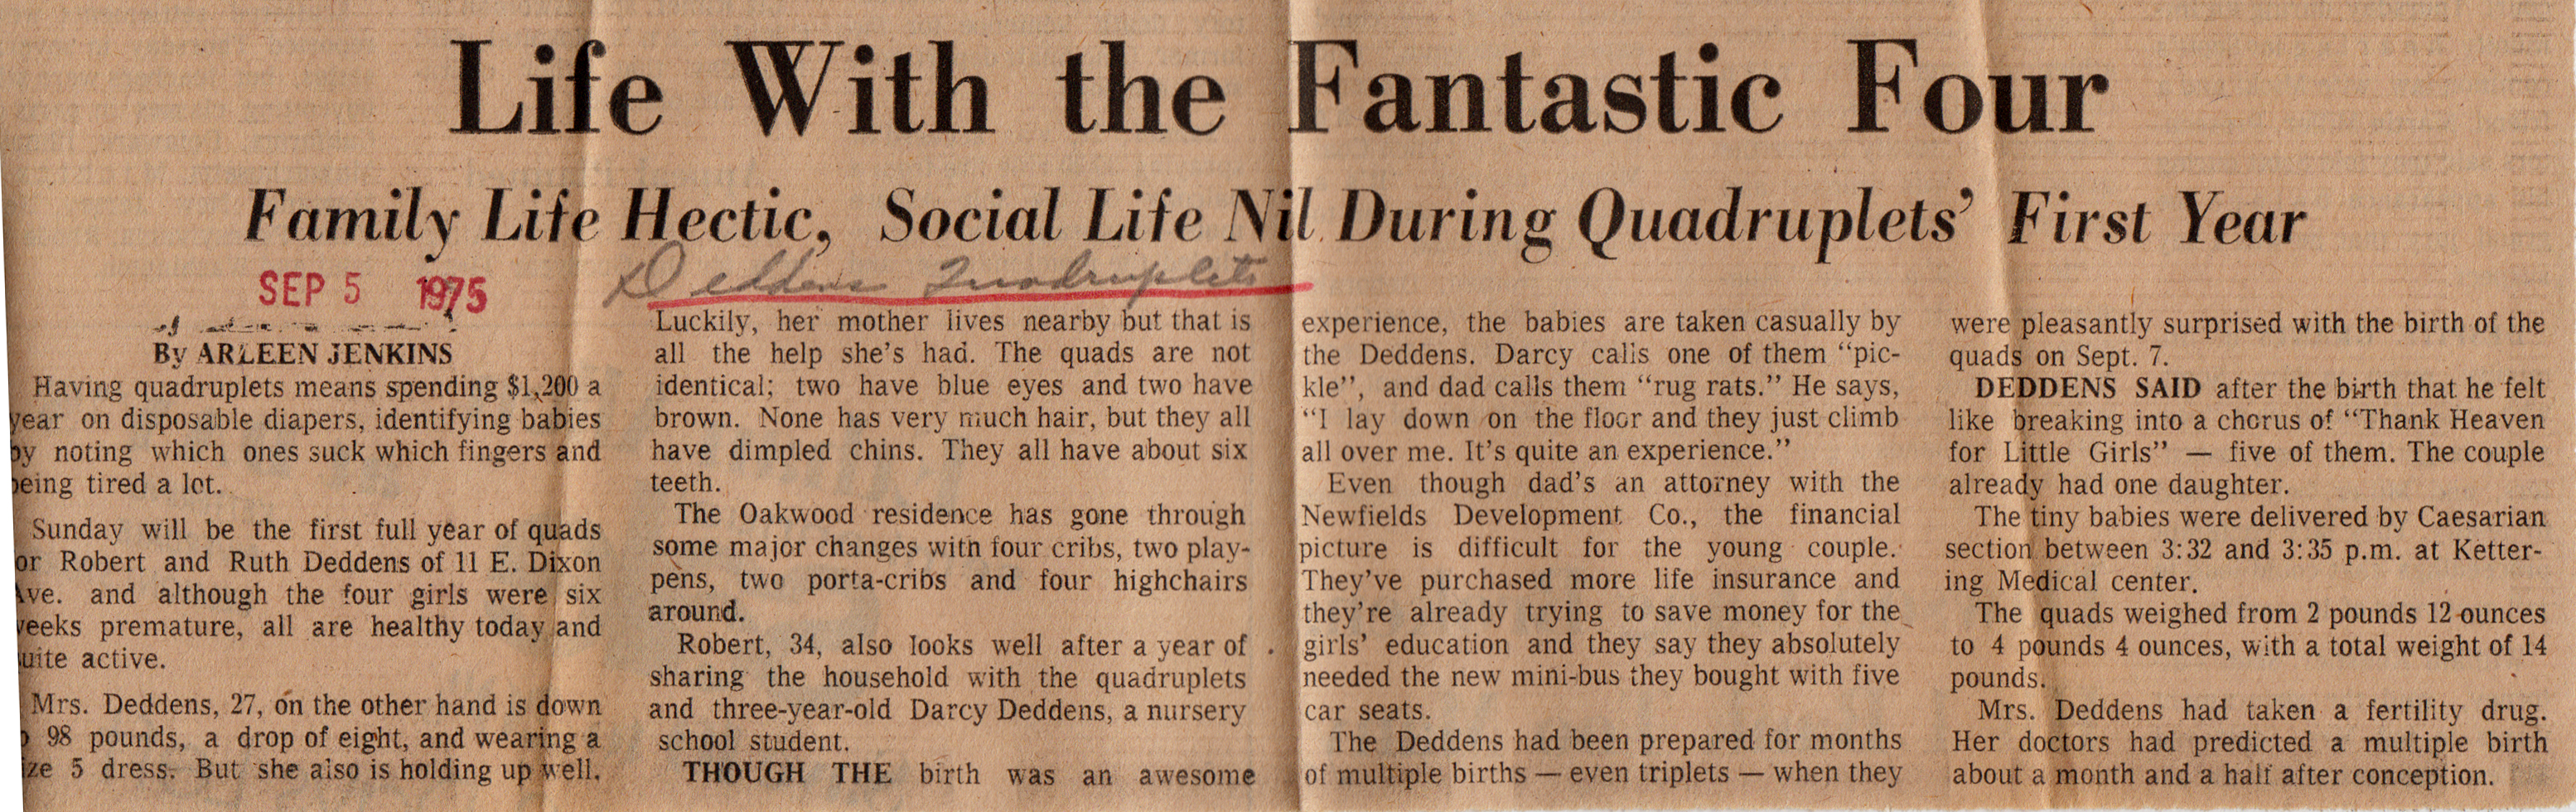 Sept. 5. 1975, article